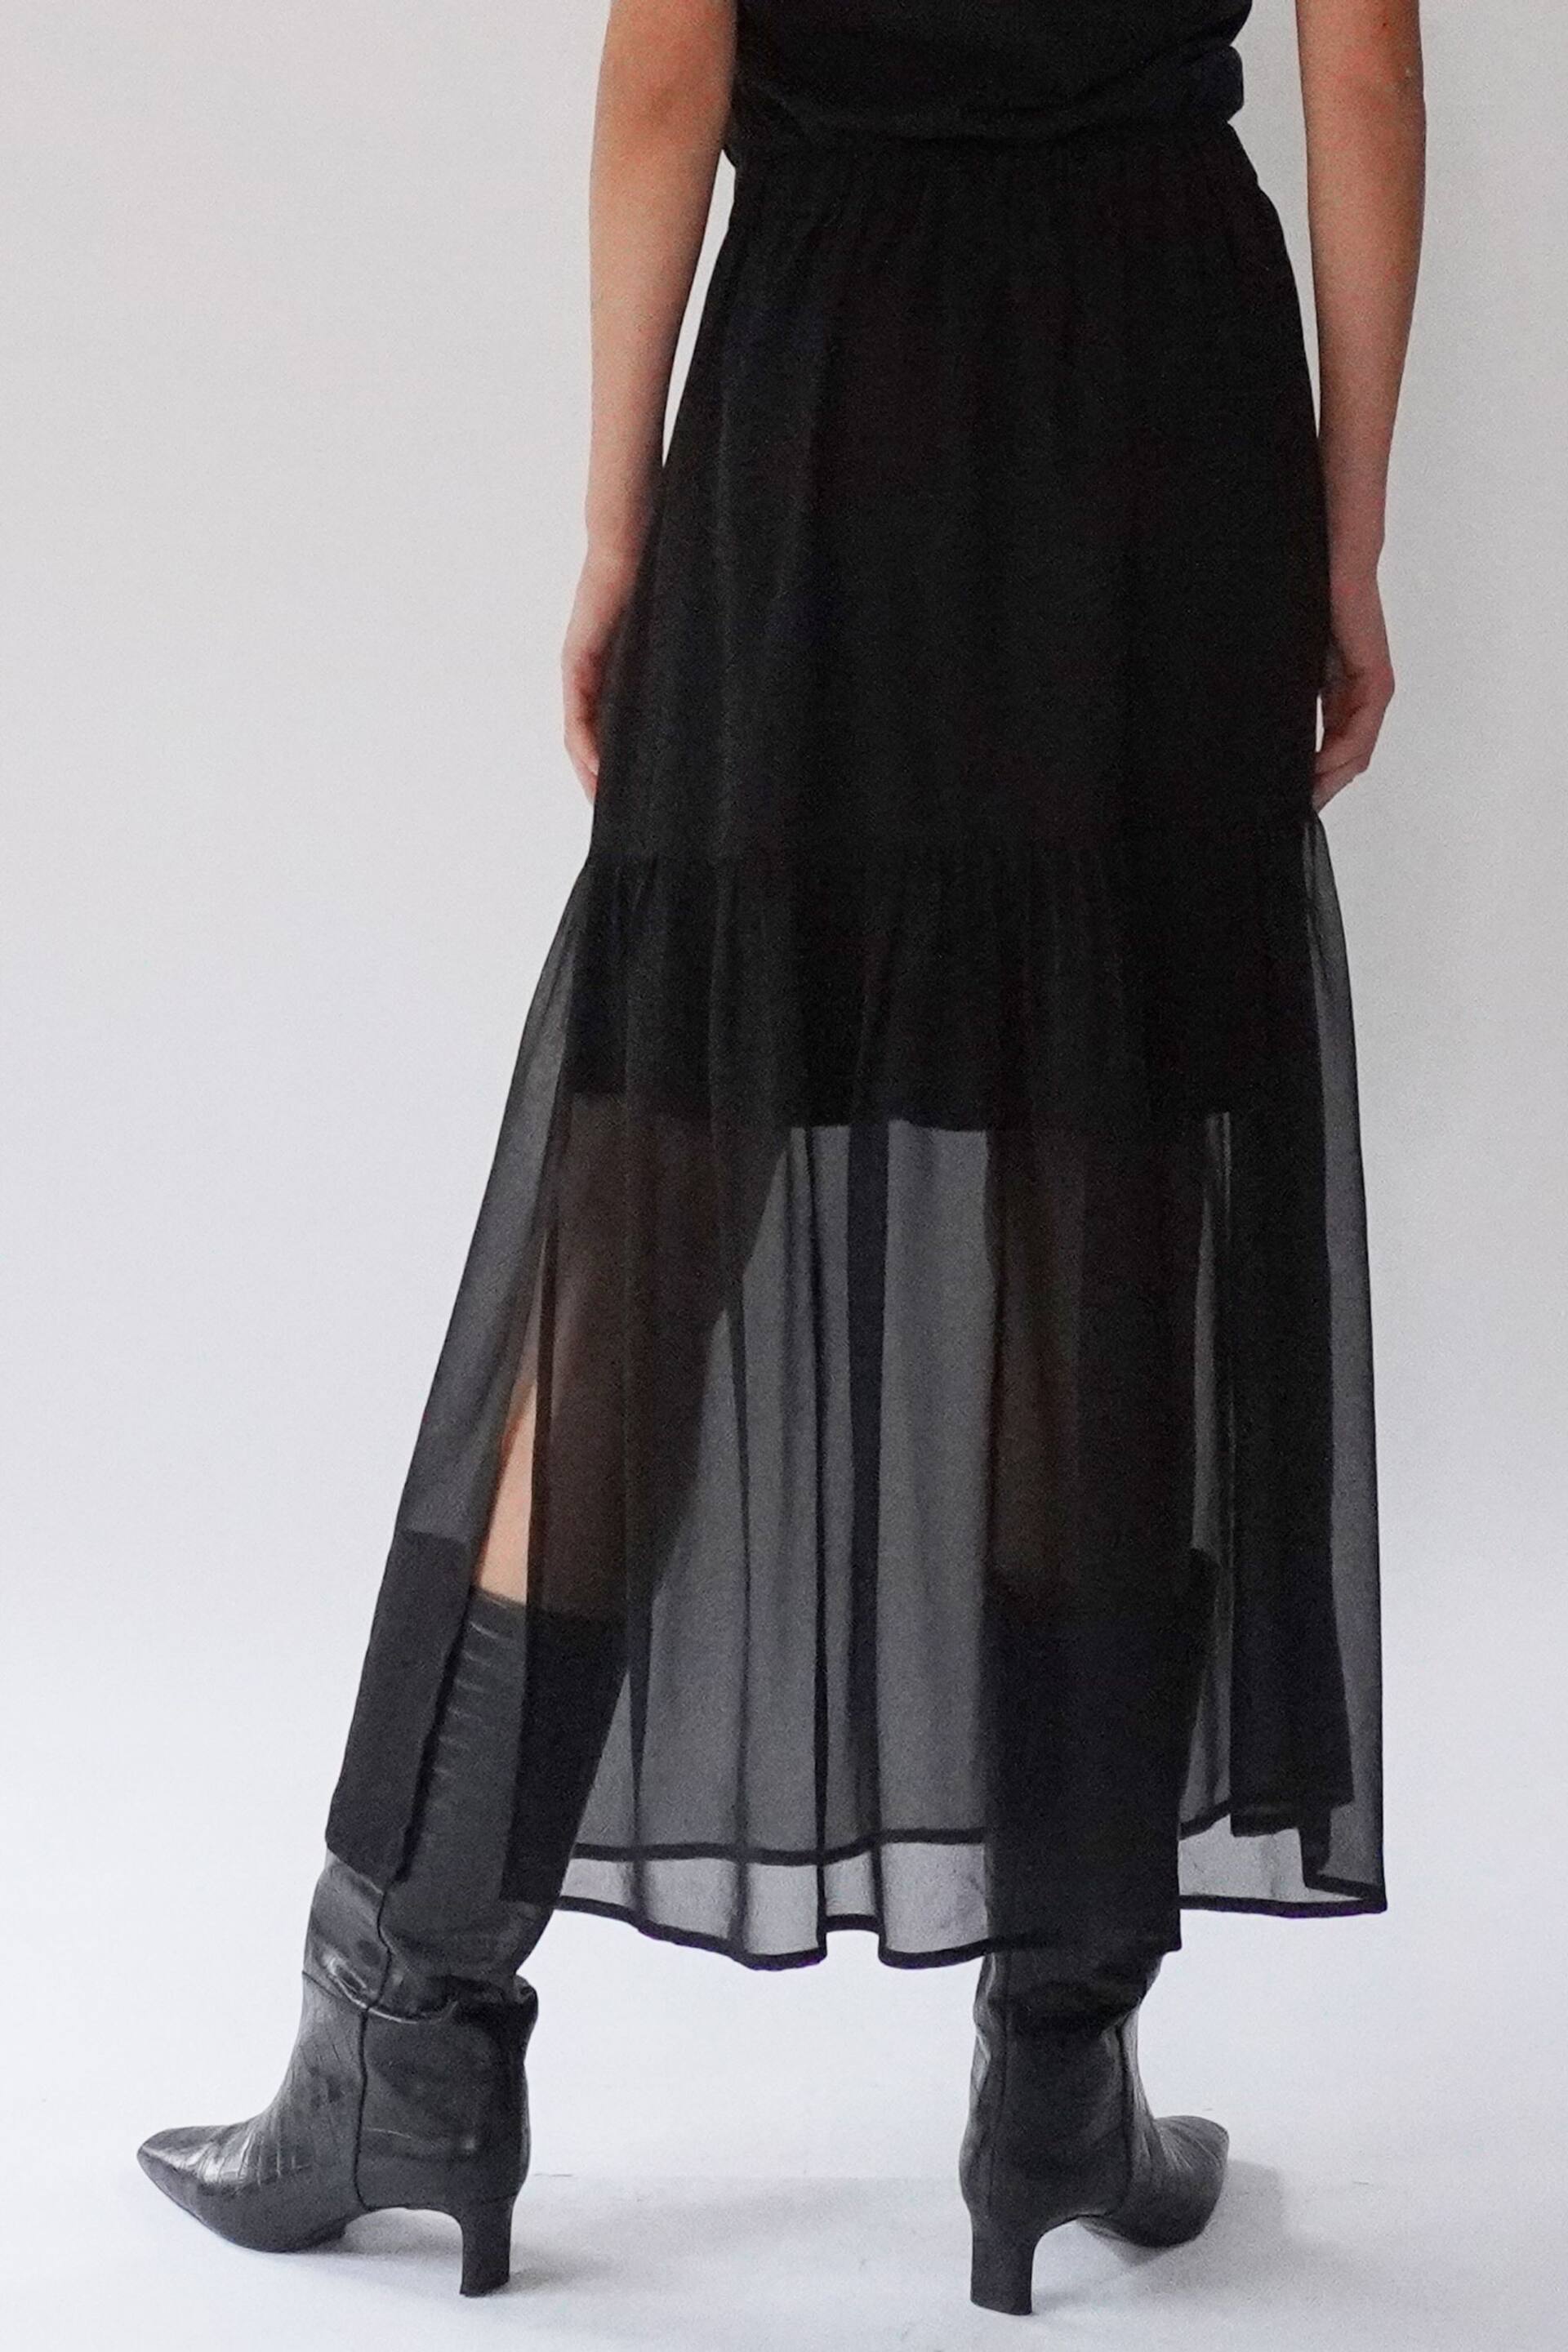 Religion Black Tiered Maxi Skirt In Sheer Georgette and Short Lining - Image 7 of 8